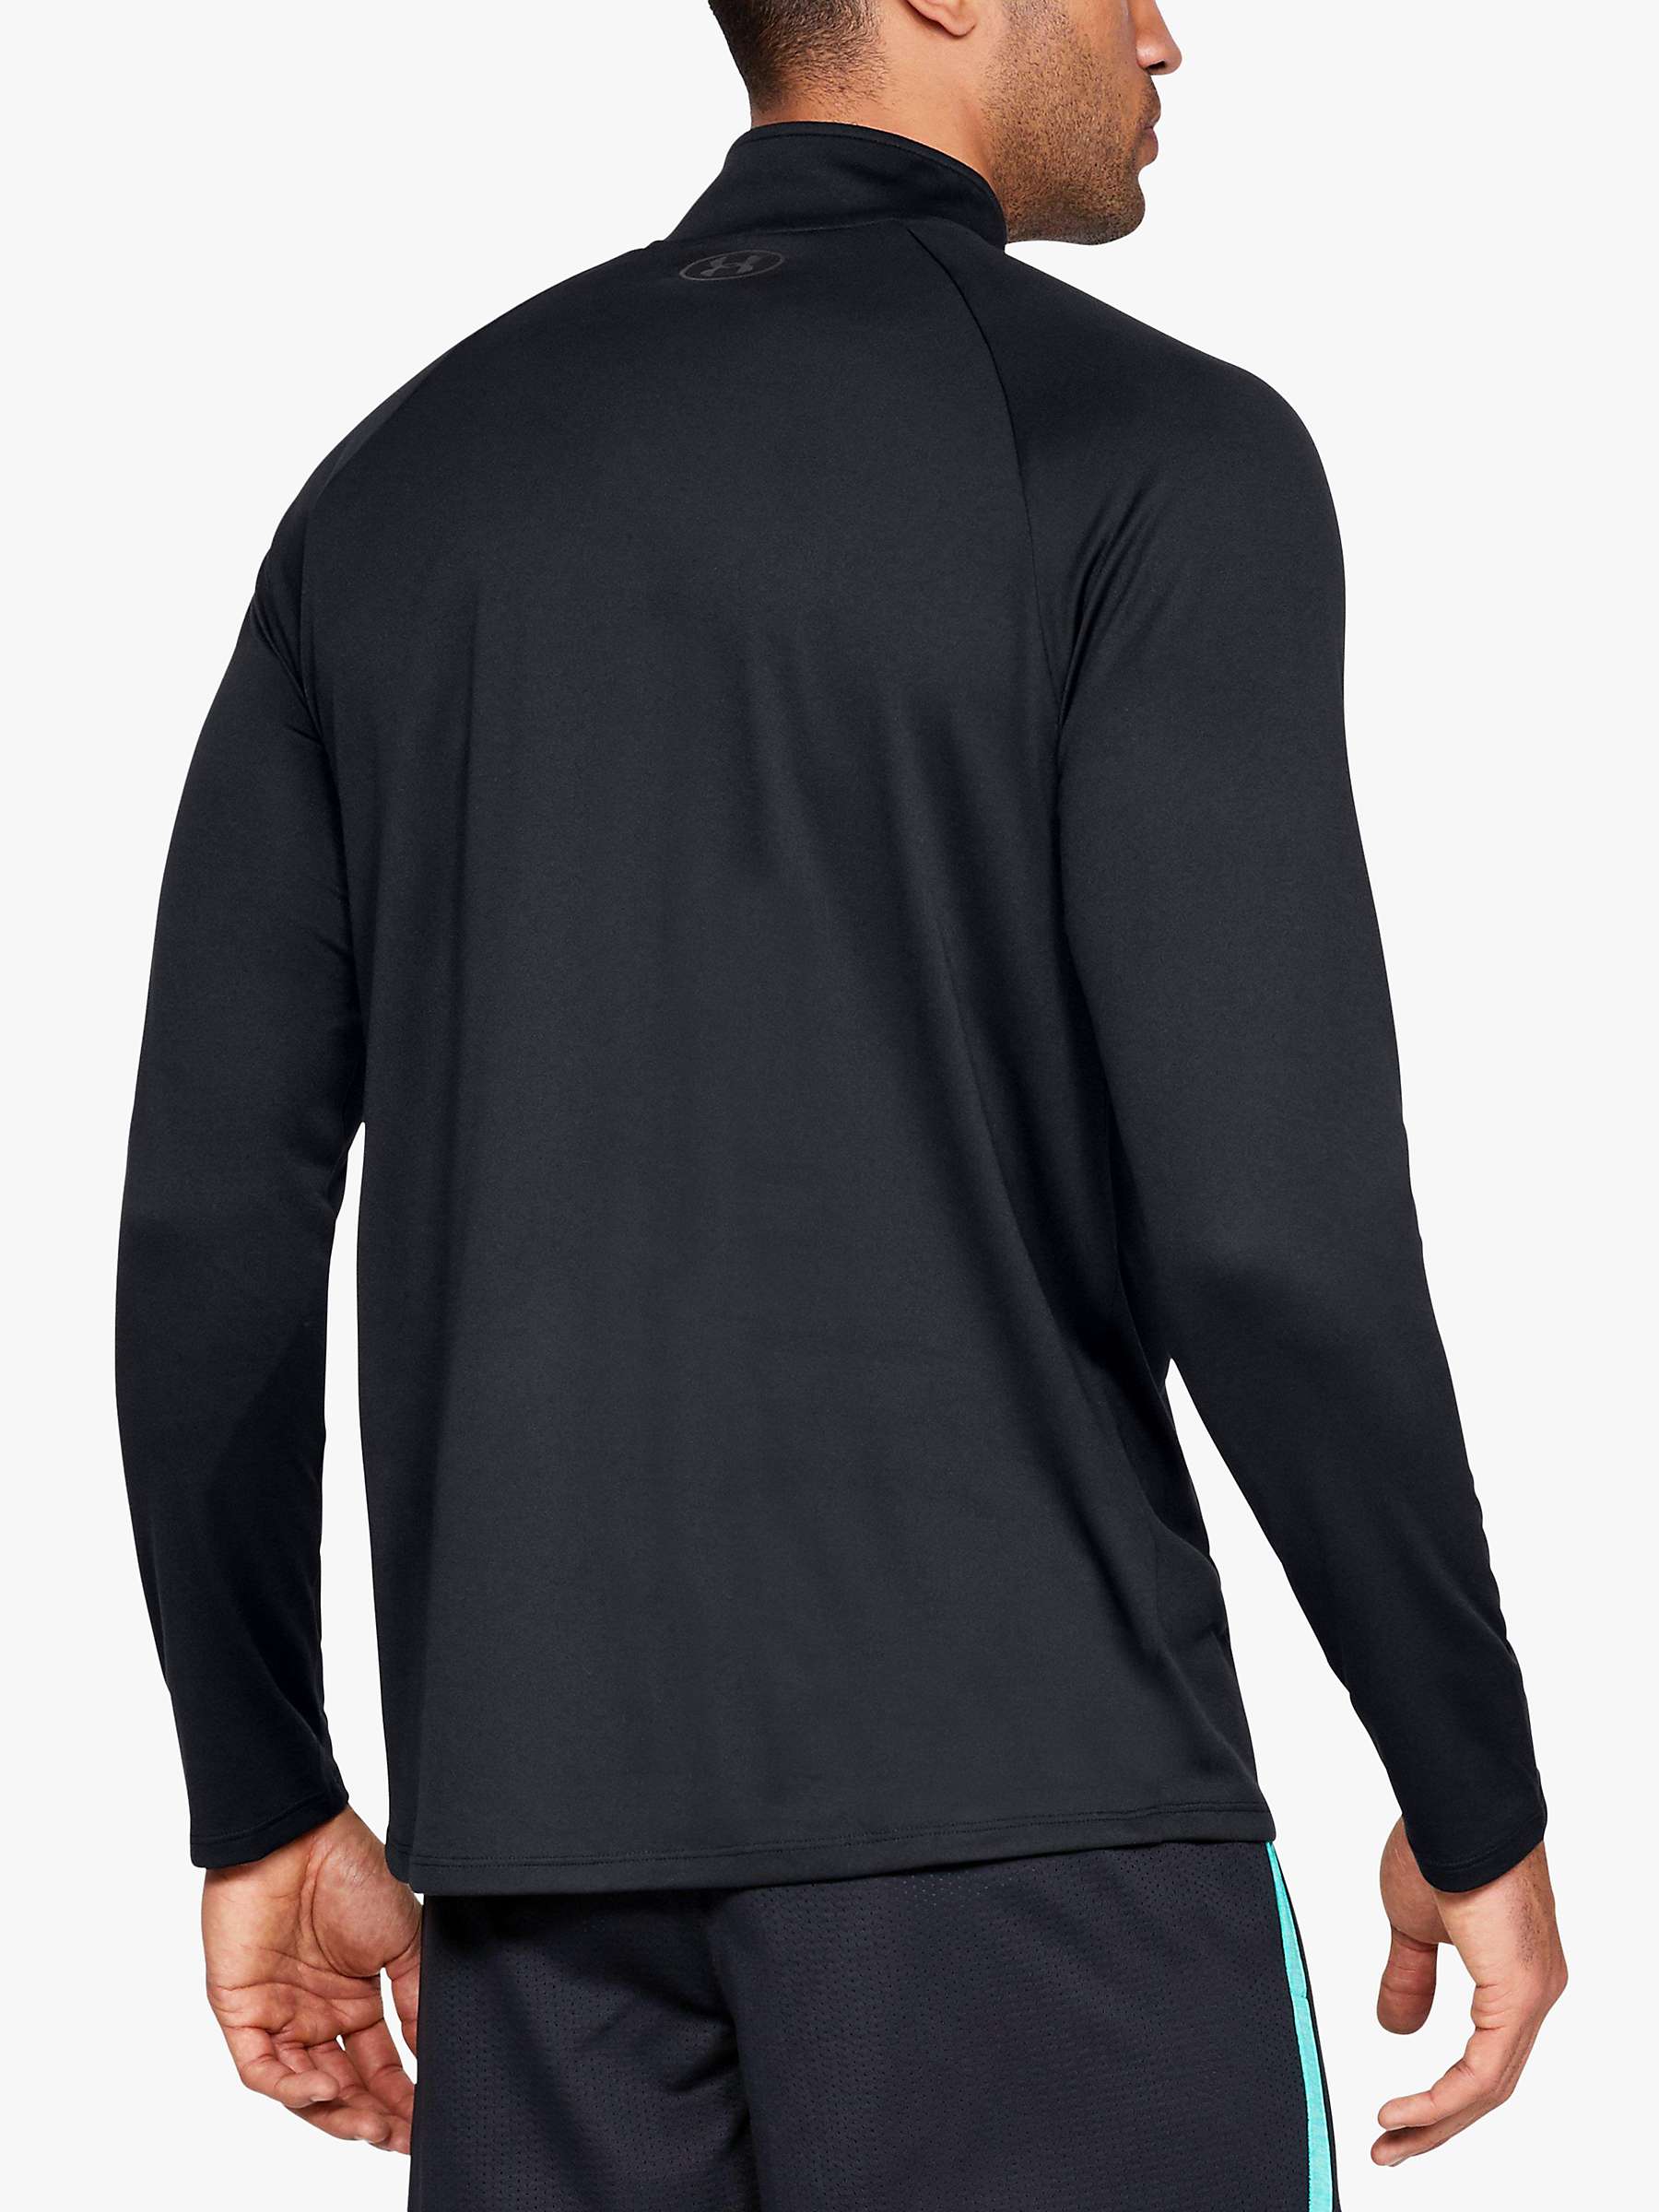 Buy Under Armour Tech 2.0 1/2 Zip Long Sleeve Training Top Online at johnlewis.com